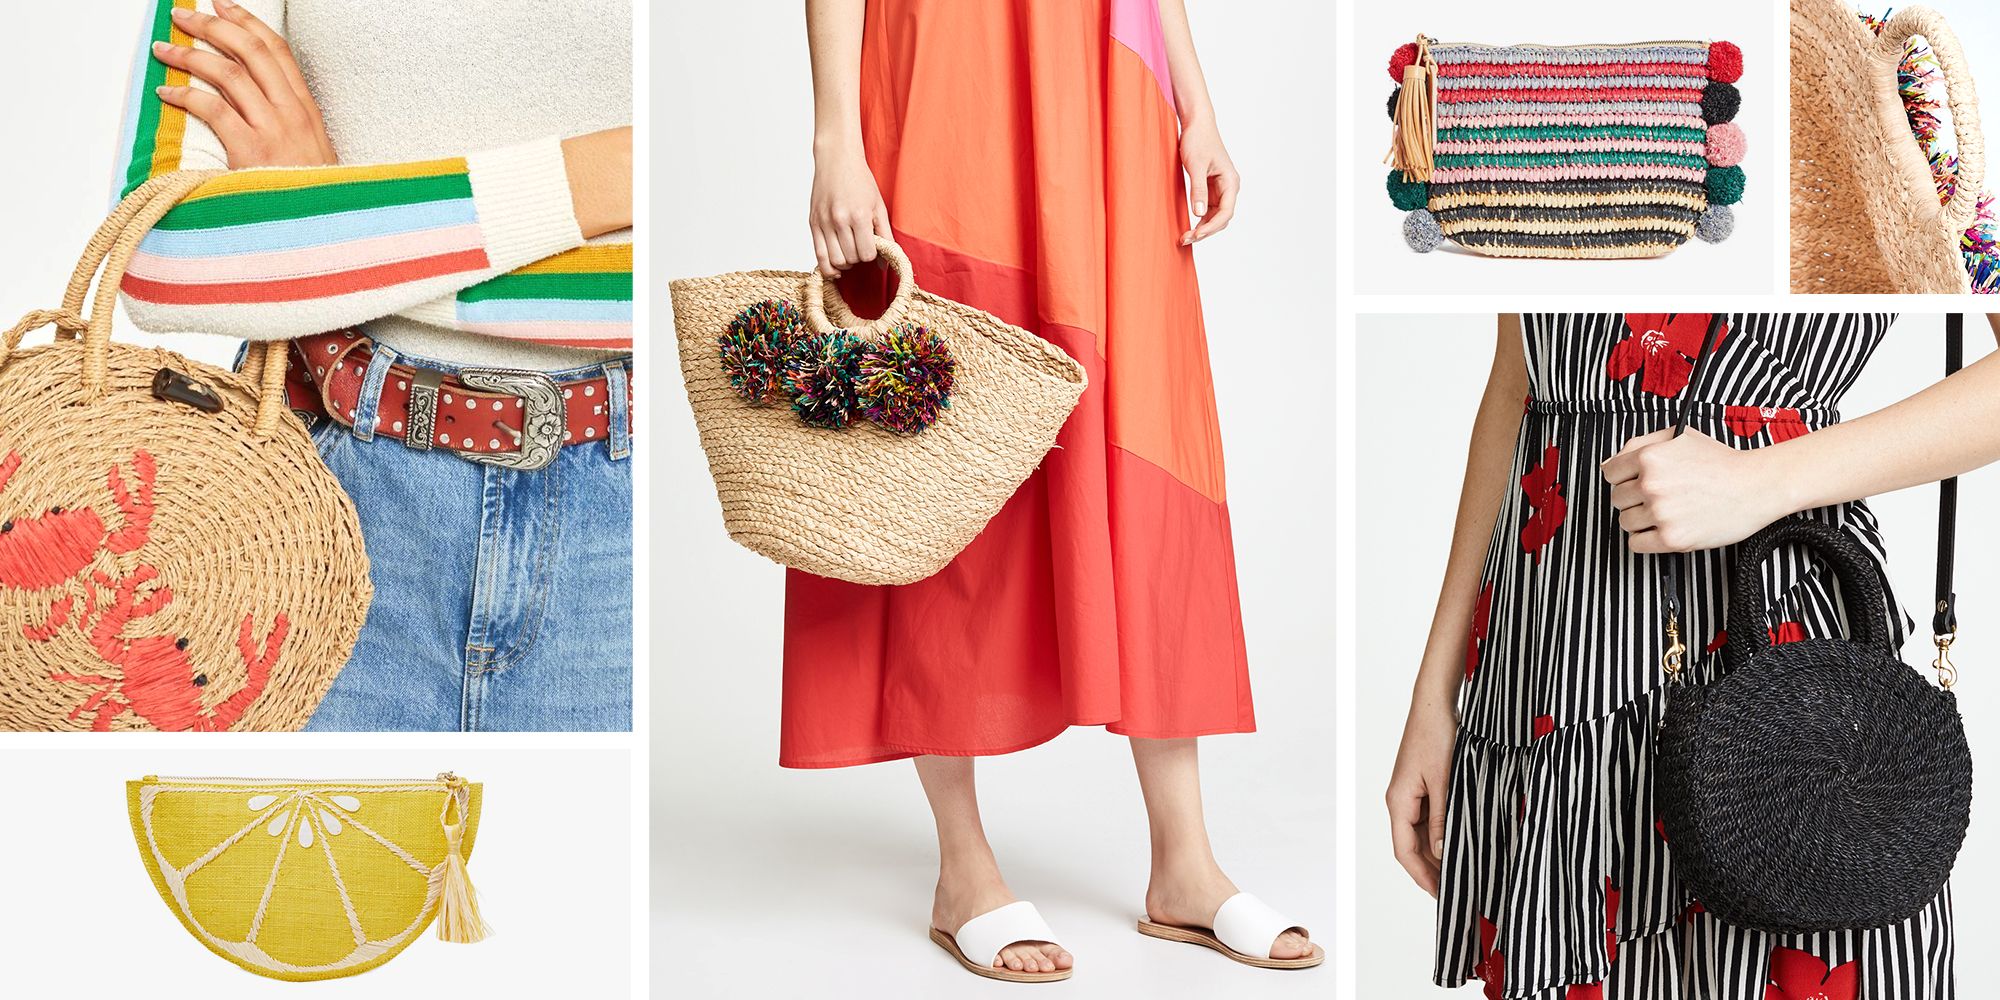 Best straw bags for your summer wardrobe - and don't forget the